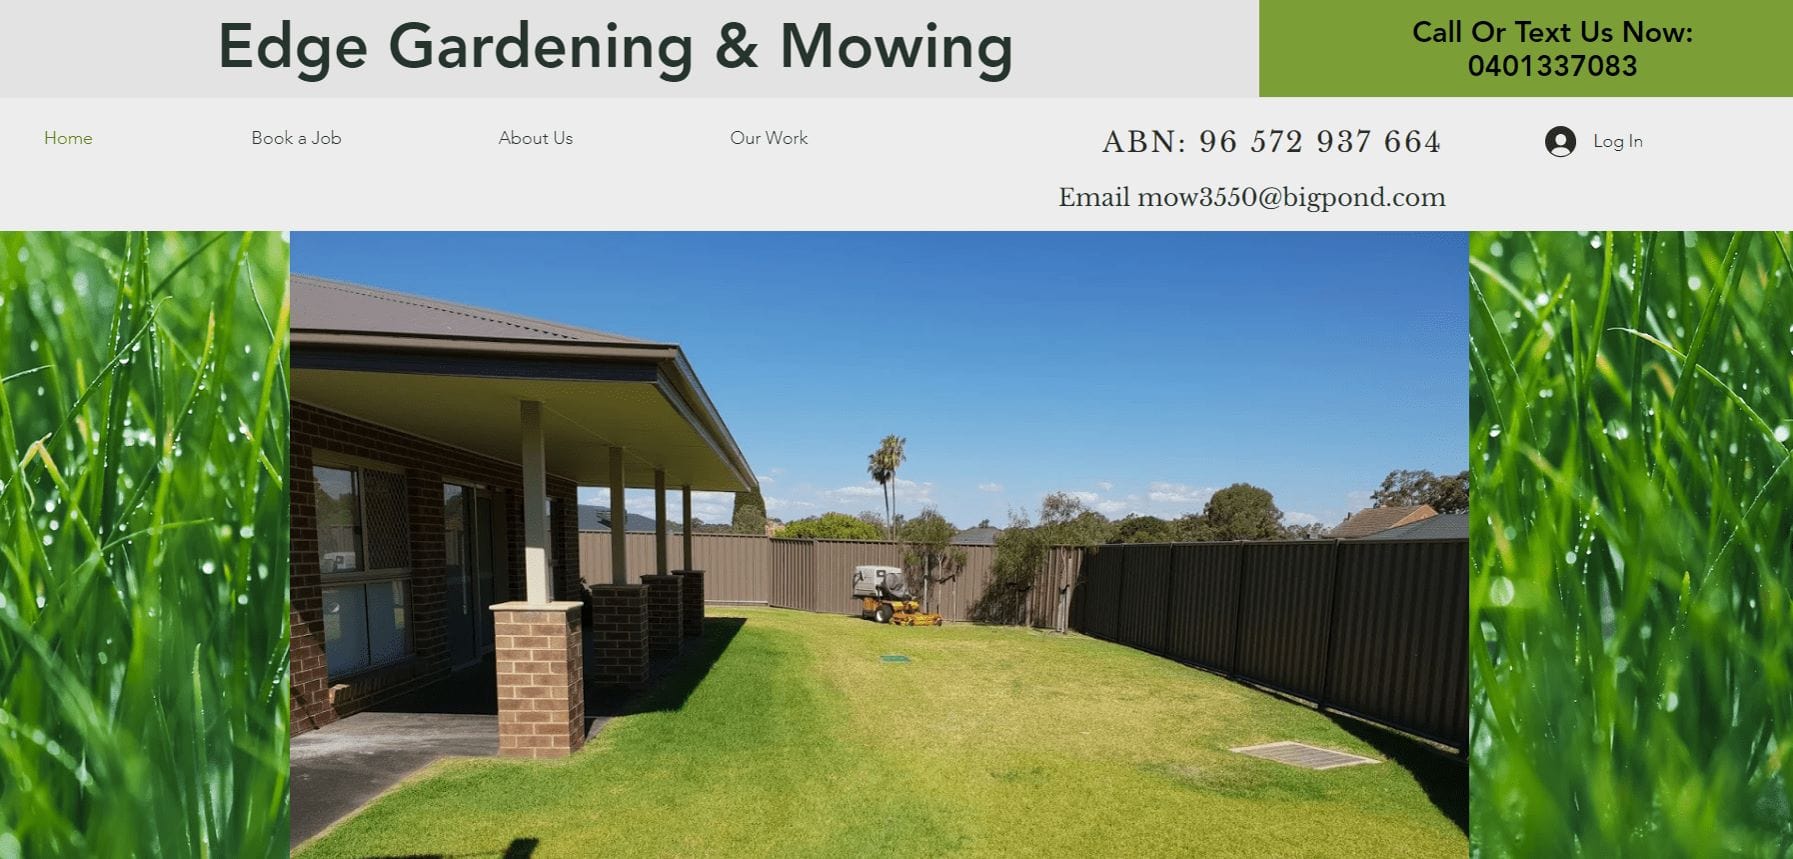 edge gardening and mowing